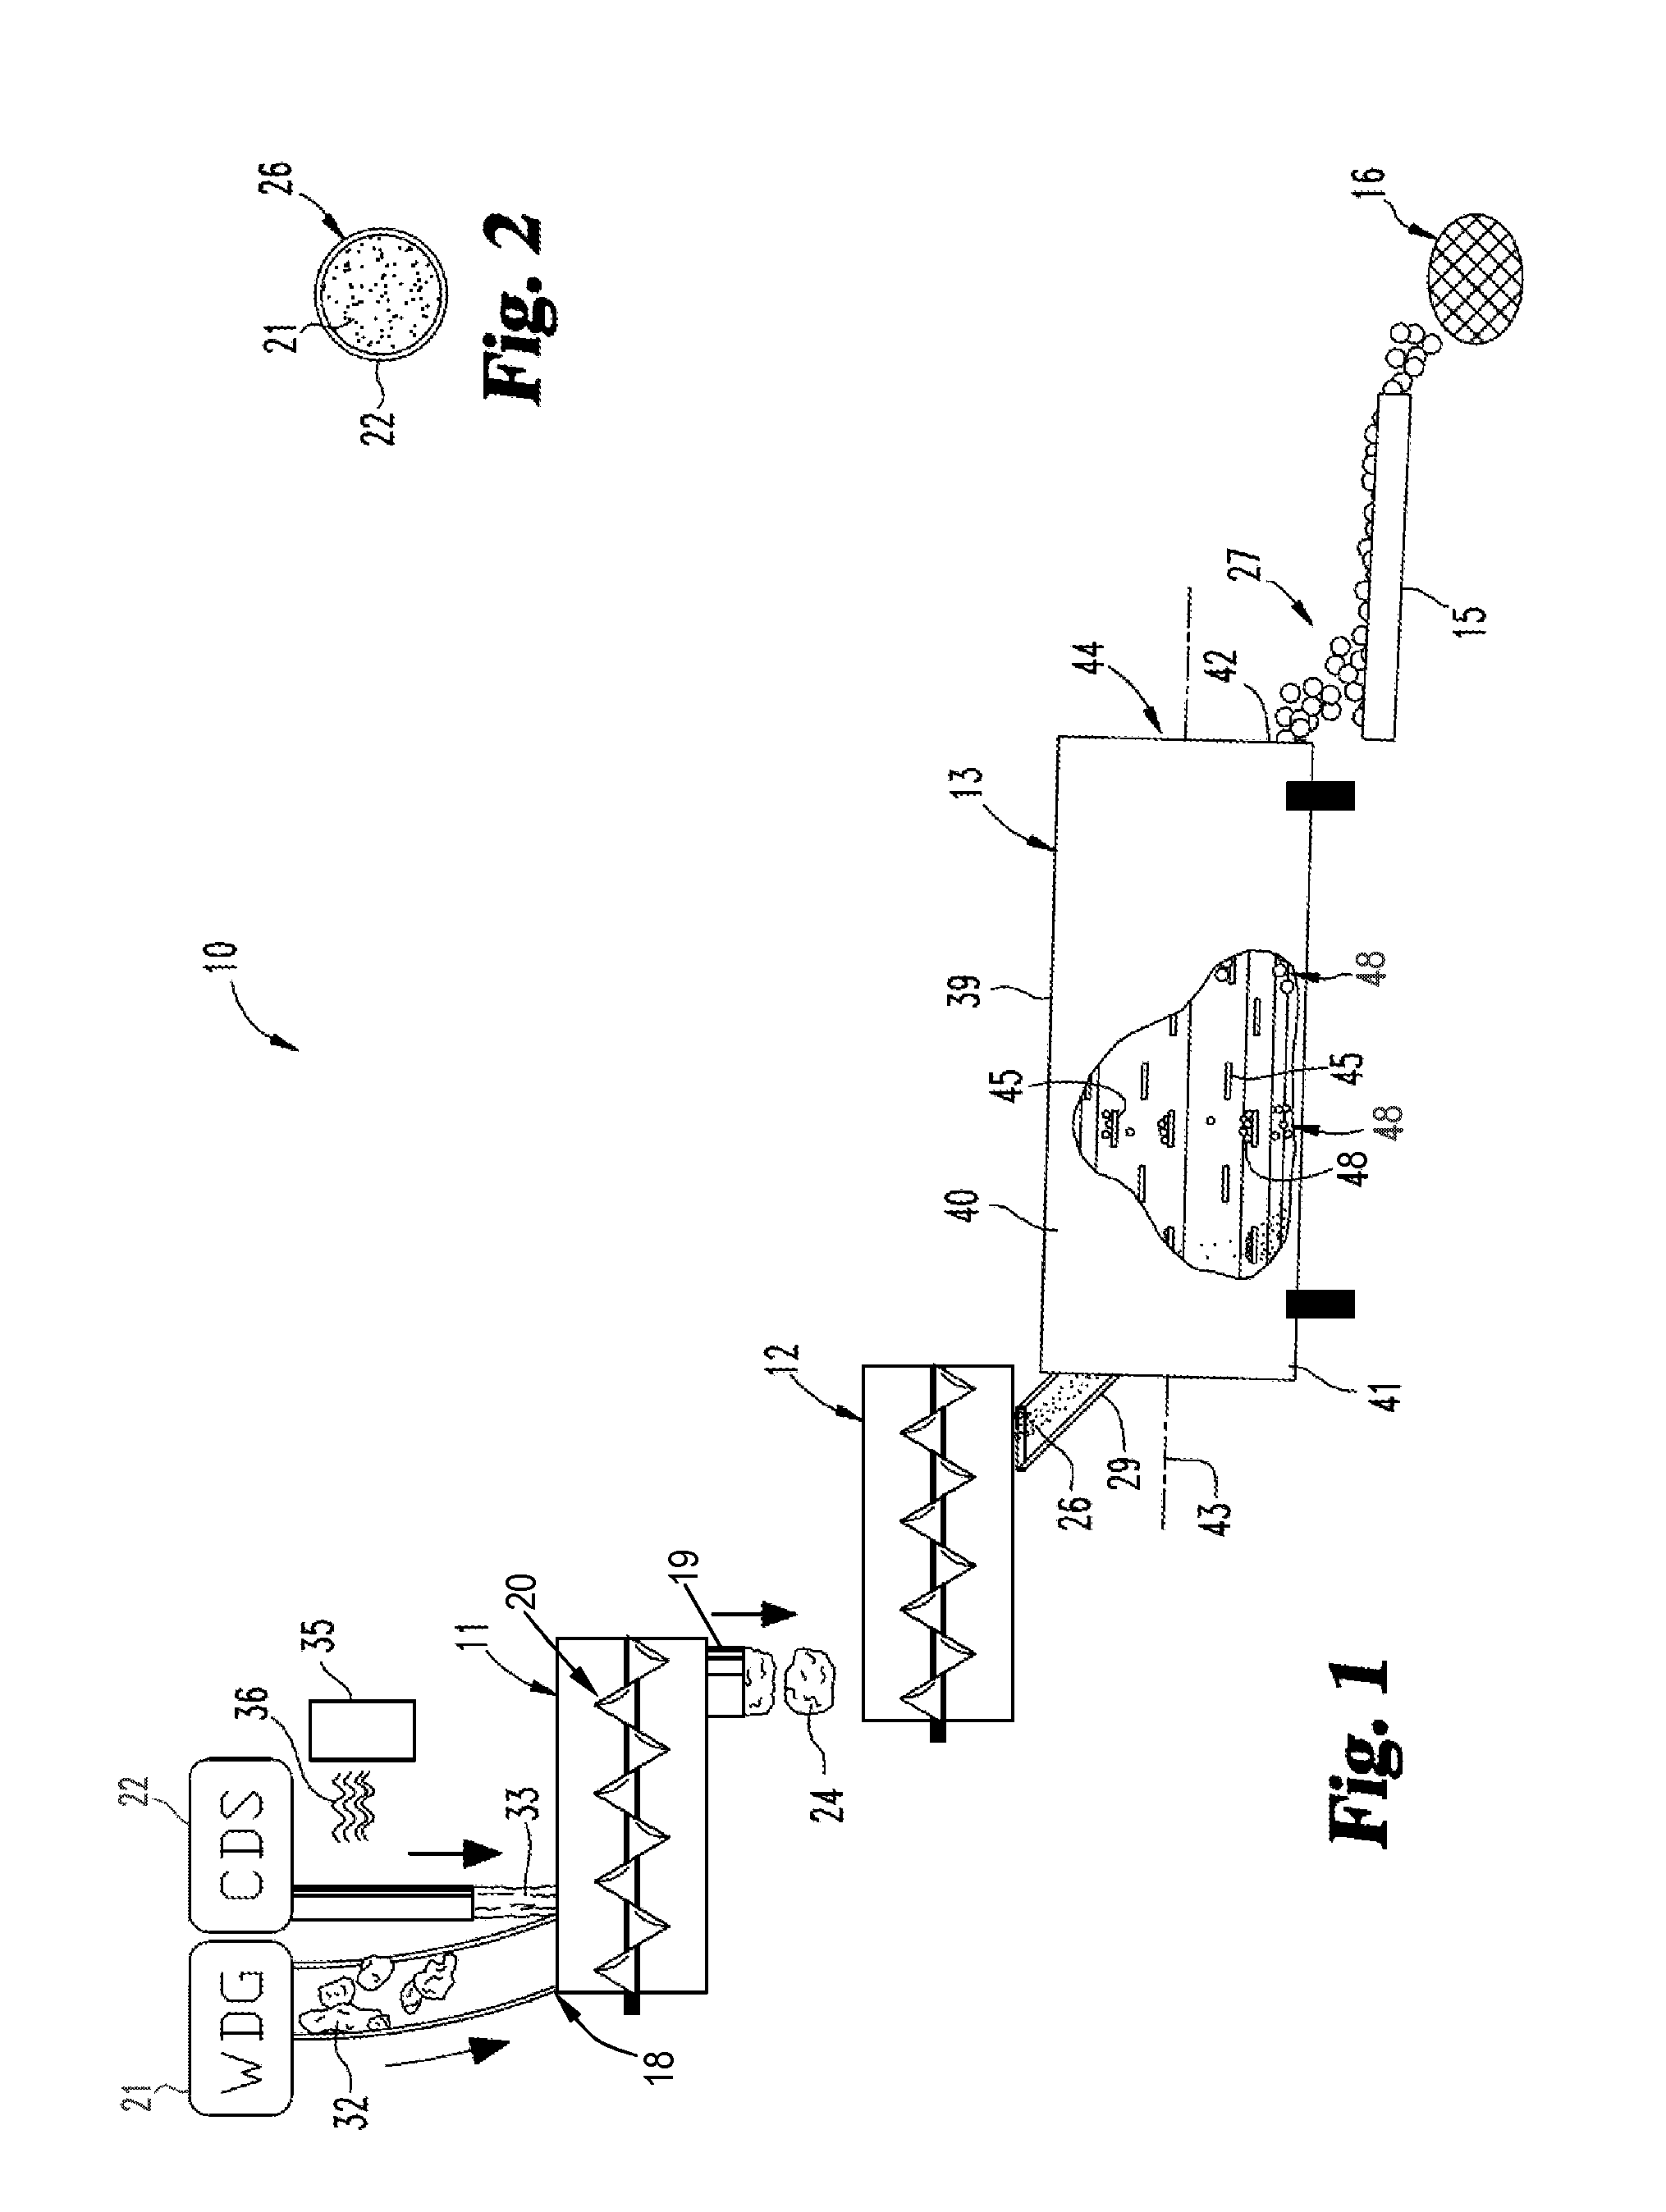 Apparatus and method for producing biobased carriers from byproducts of biomass processing